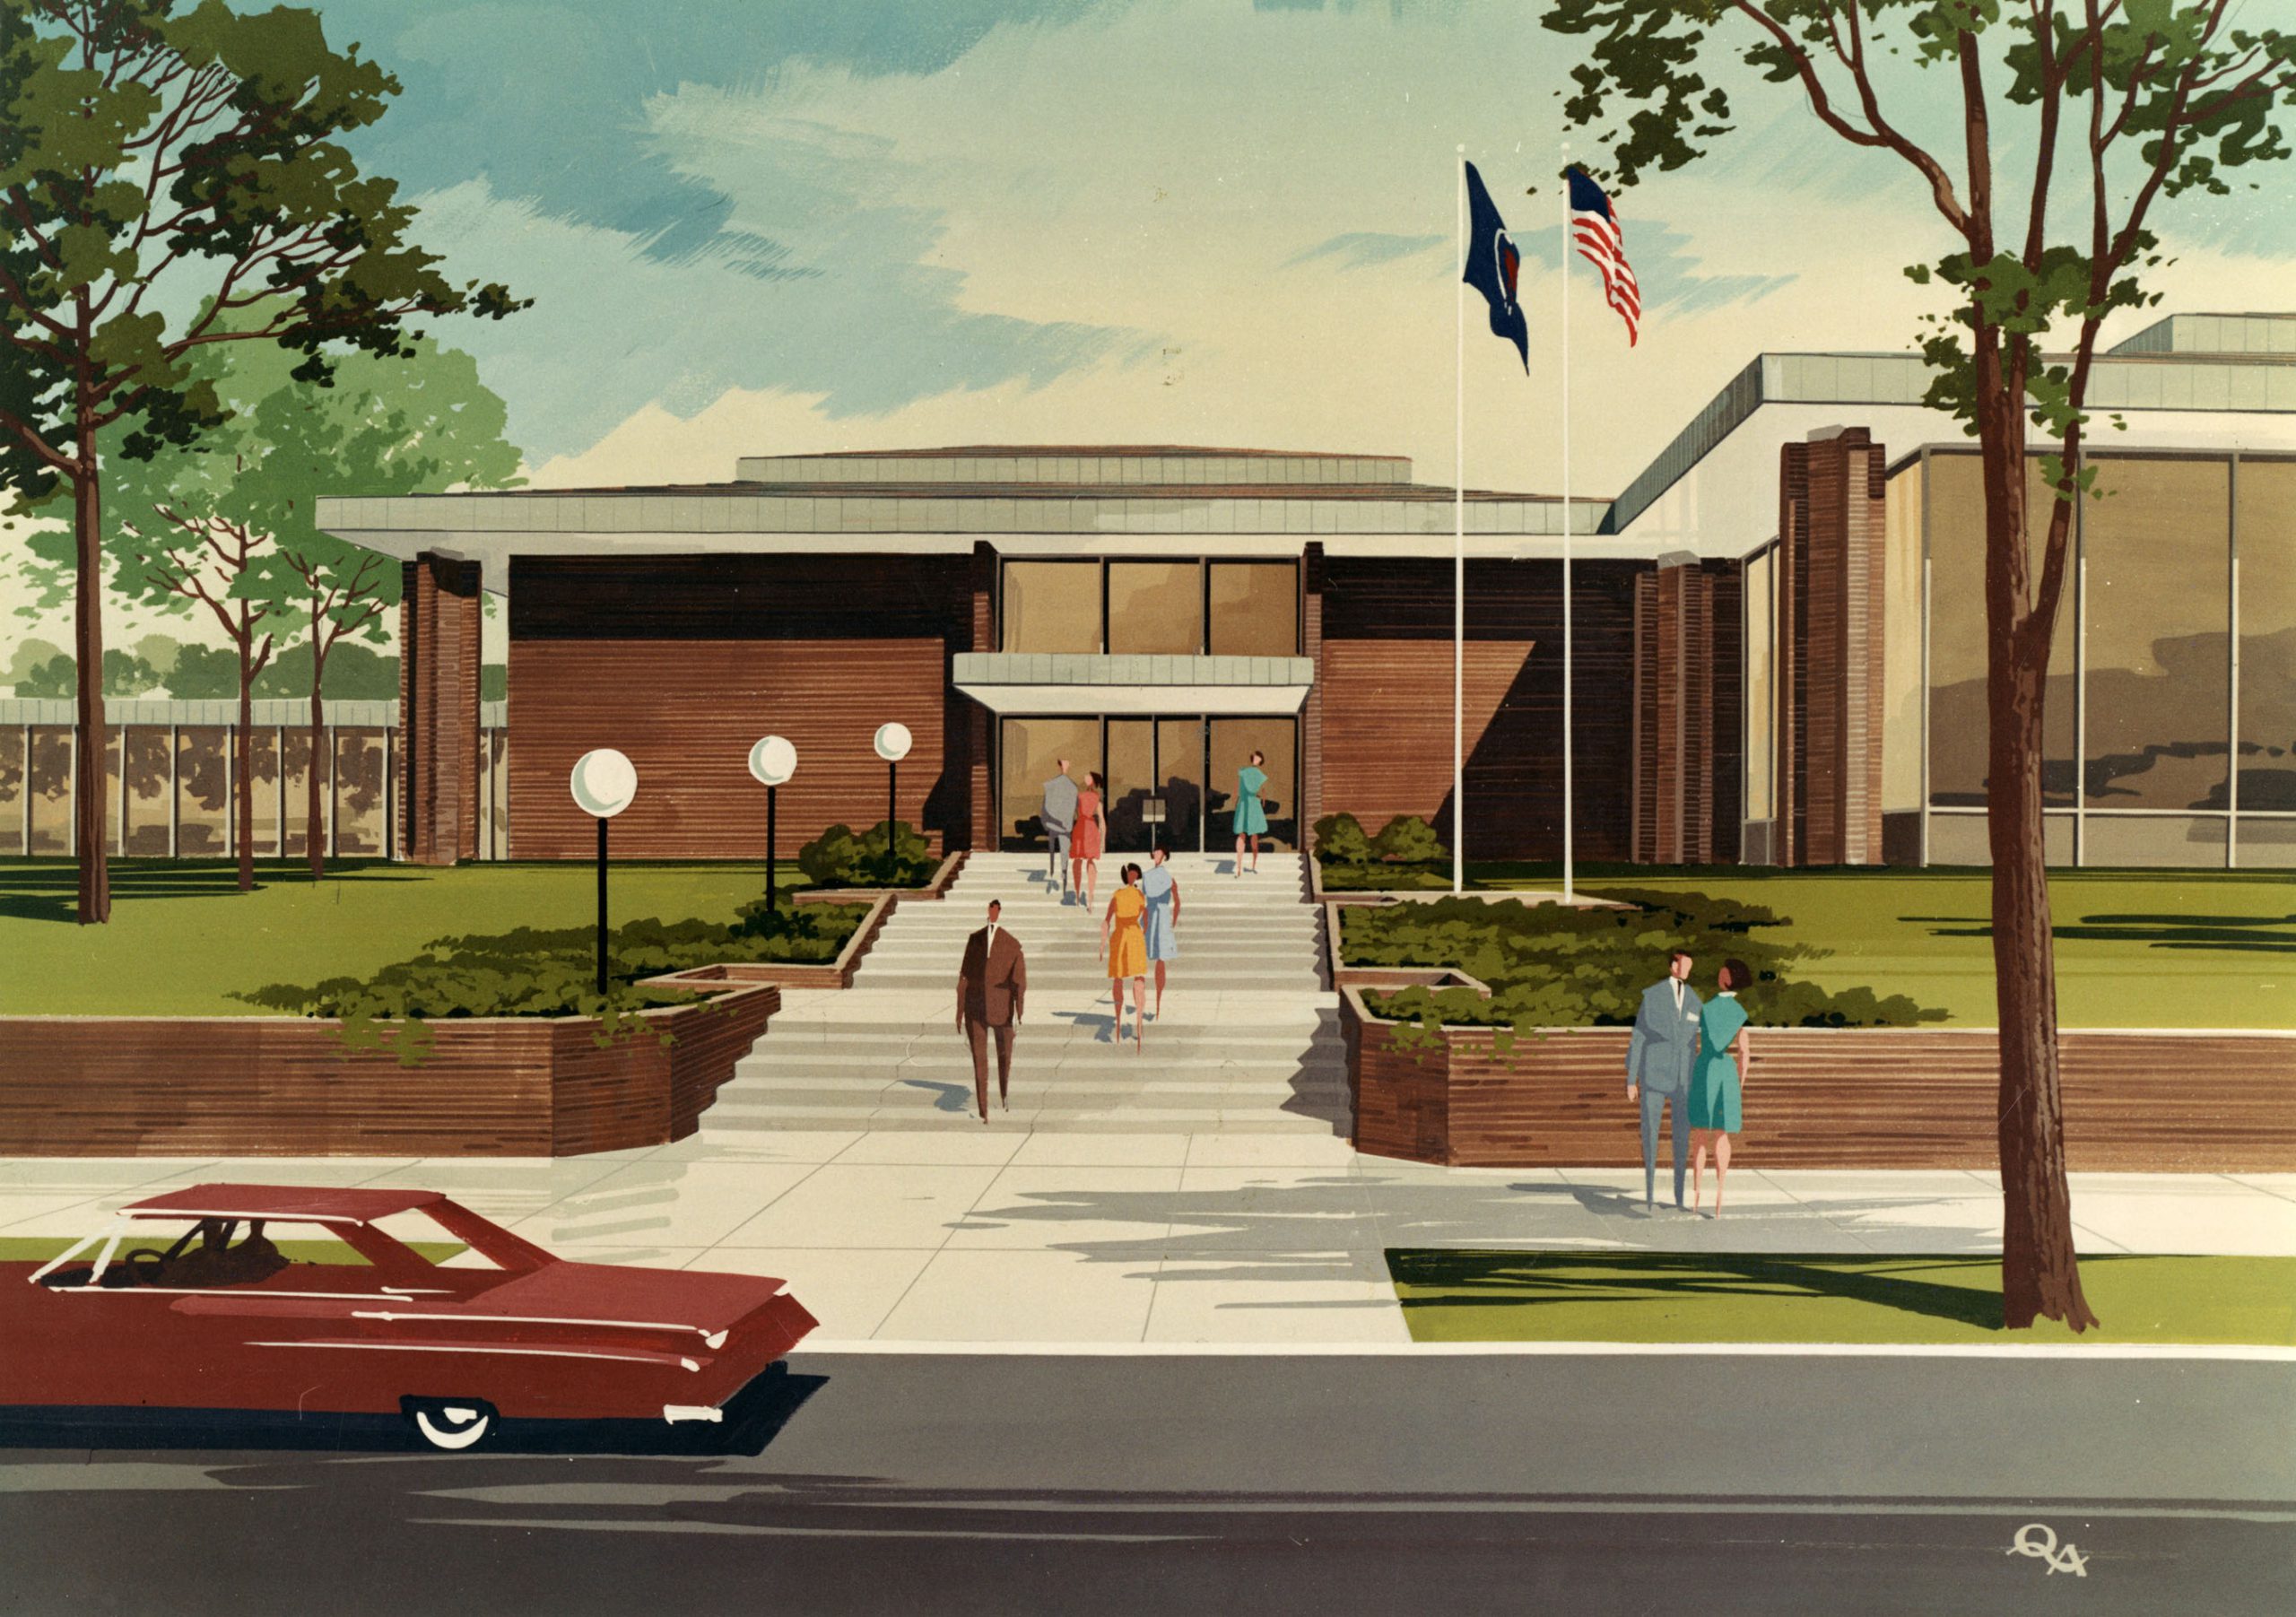 The preliminary renderings of the City Center done in 1968 showed a mid-century building with wide roofs and expanses of glass.